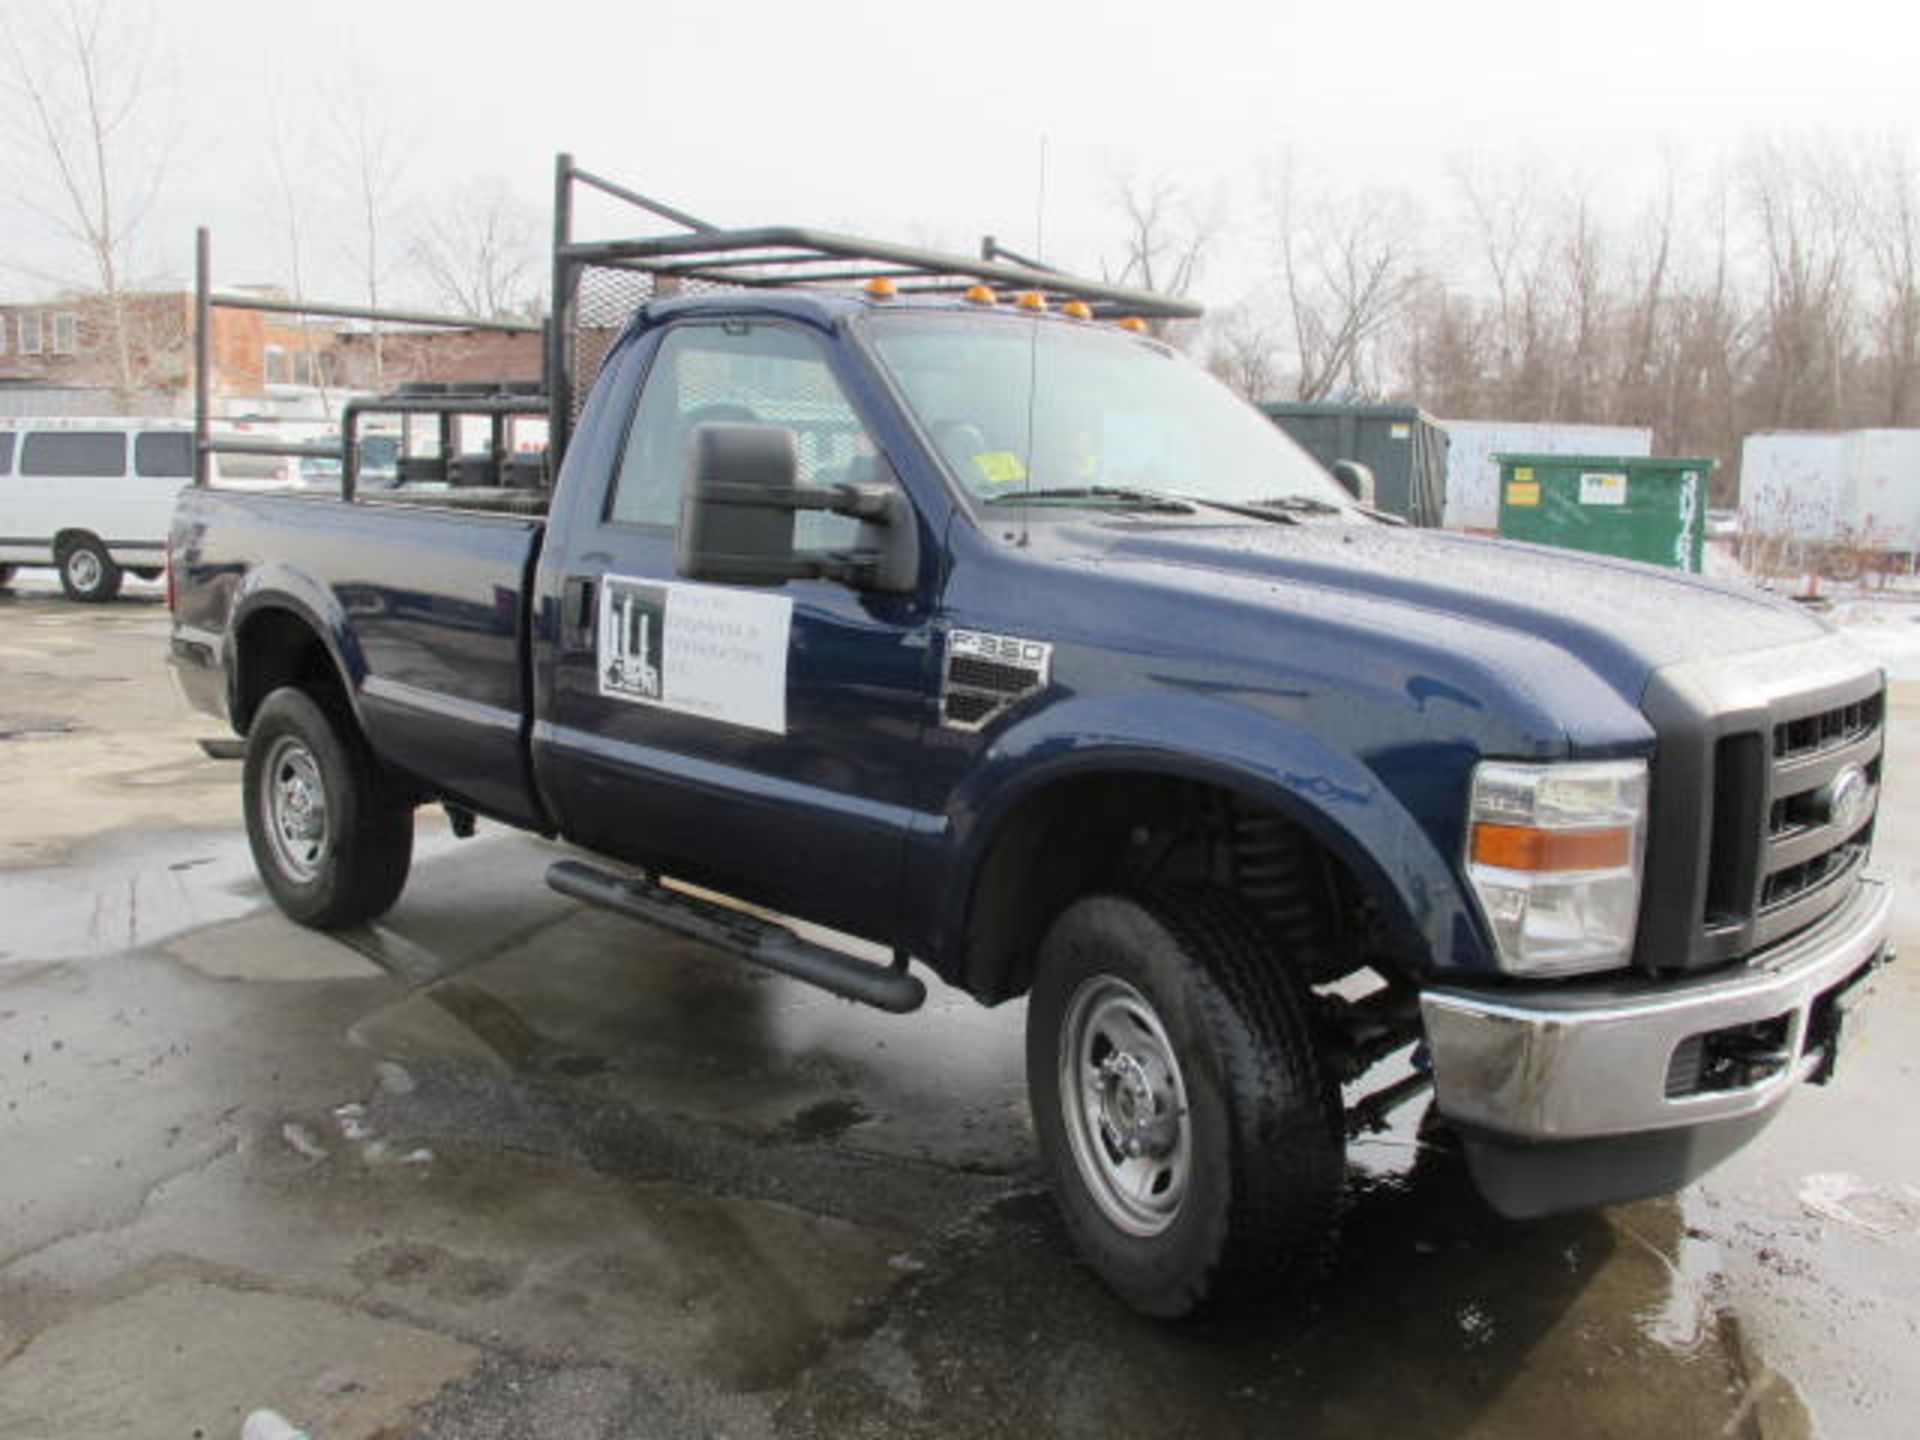 2010 Ford F350 Super Duty Pickup Truck, VIN: 1FTWF3B56AEB43638, 111,524 Miles, 4WD, 5.6 Liter Gas - Image 5 of 7